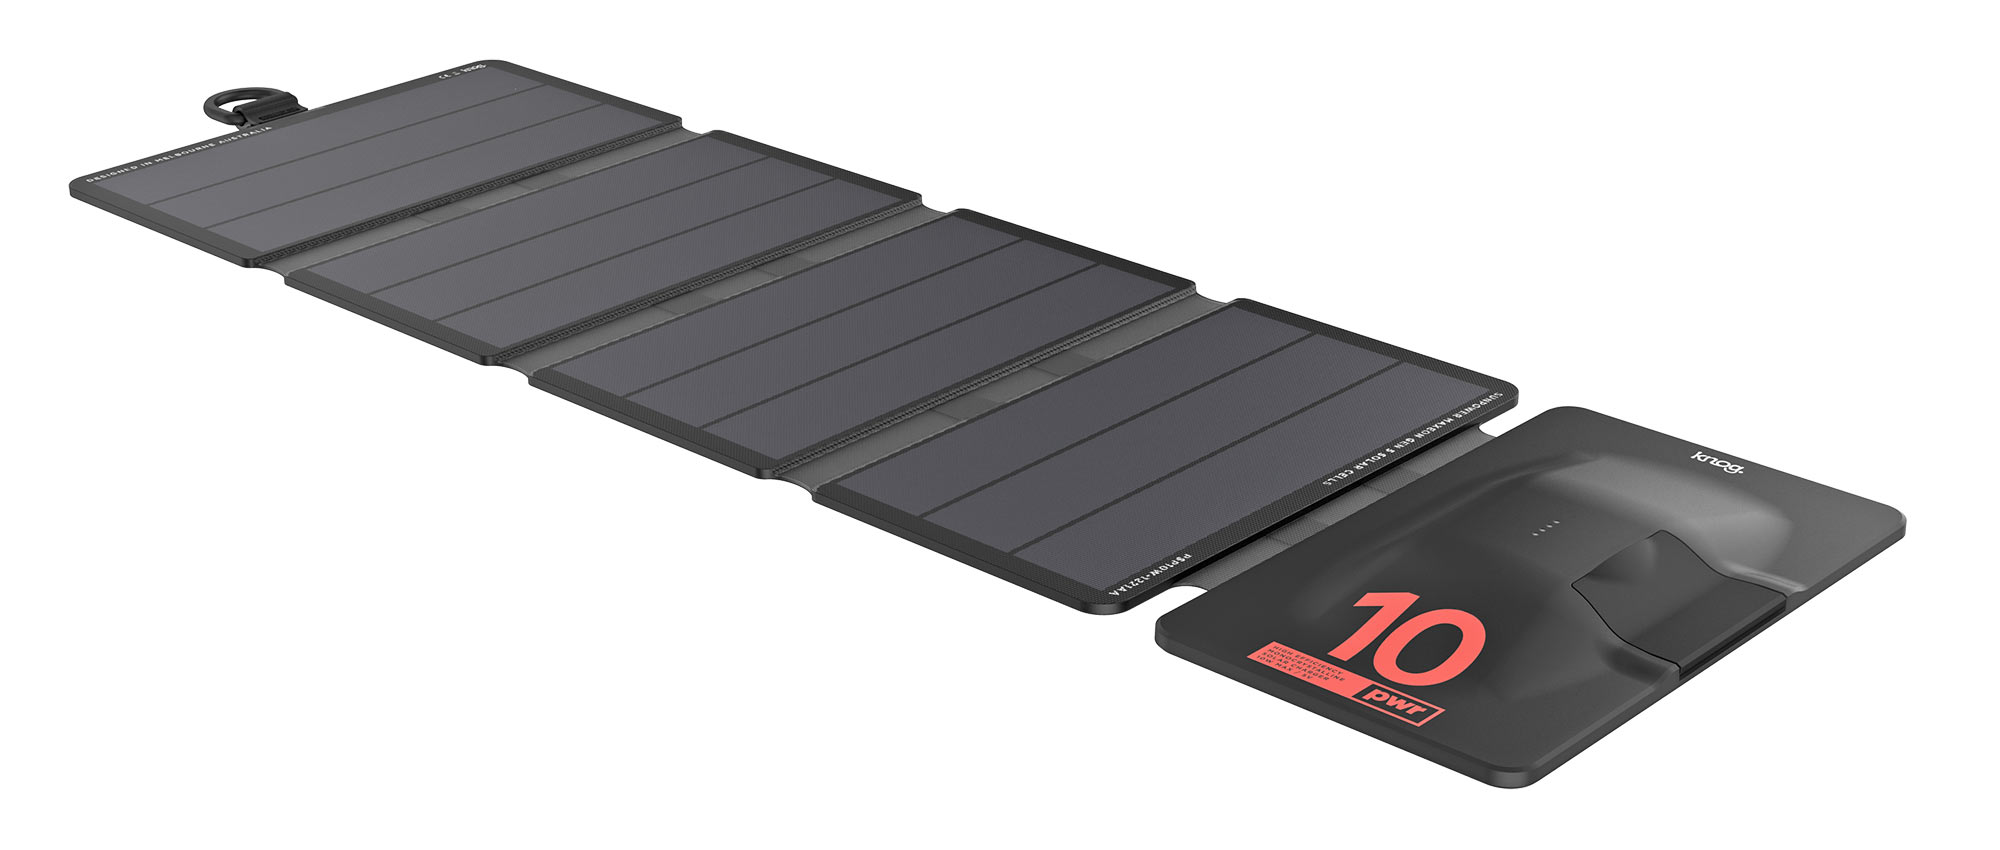 Knog PWR Solar 10W, folding compact photovoltaic panel bikepacking solar charger, open